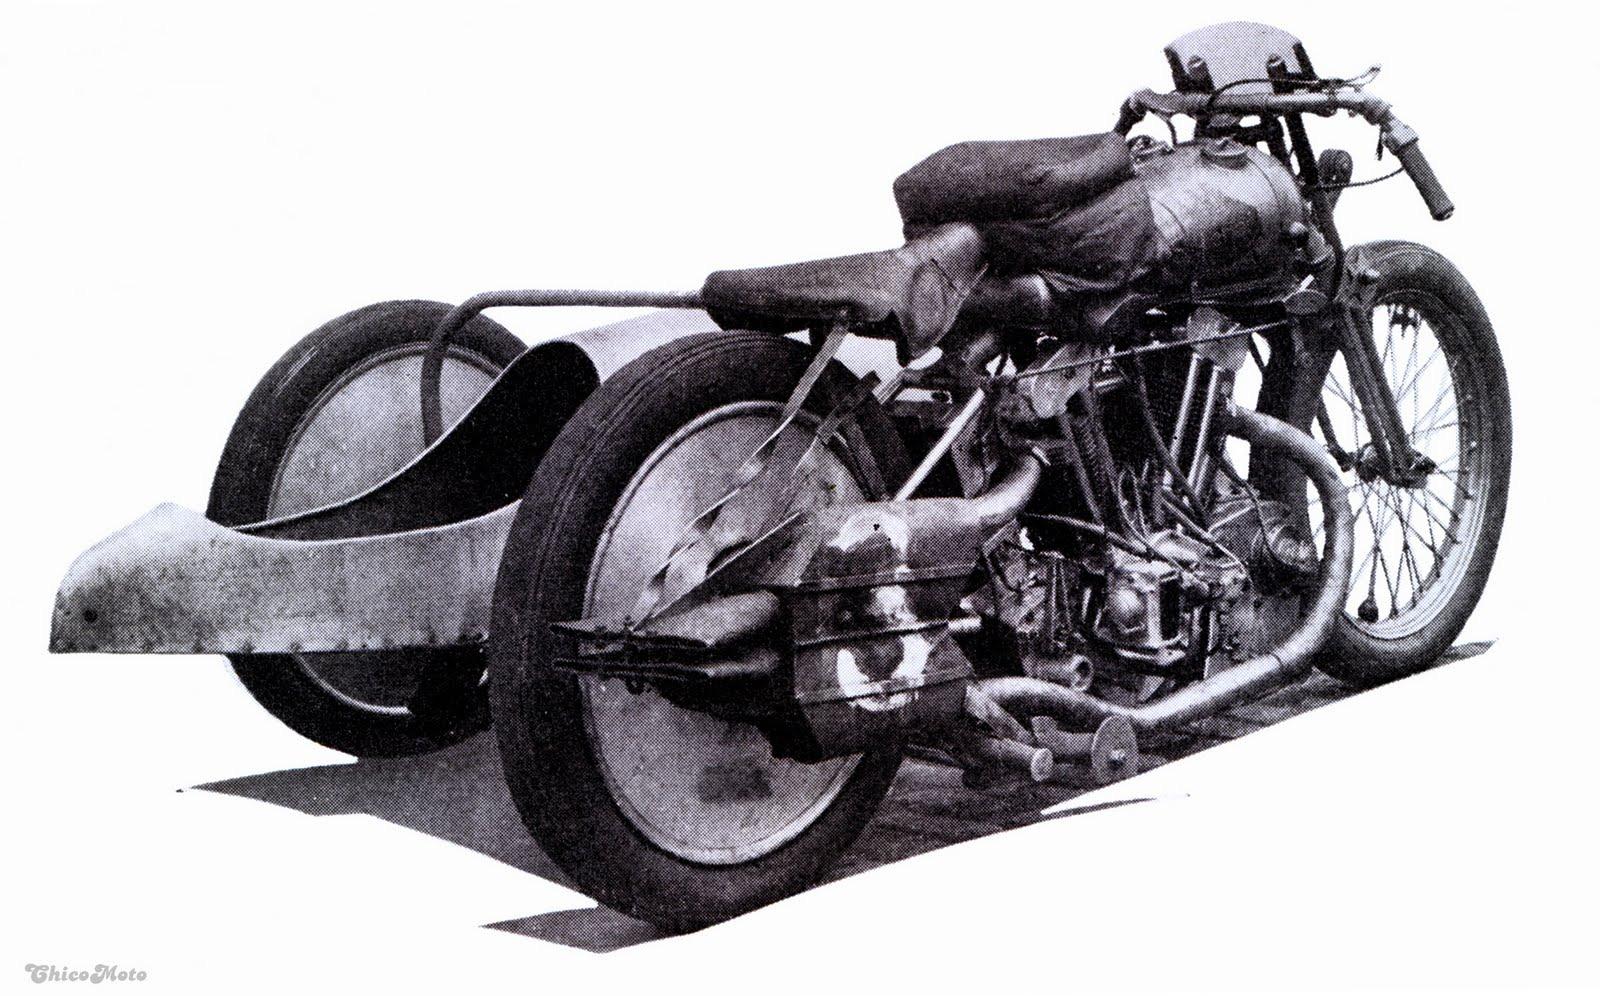 Brough SSS (Superior Supercharged Side-car)